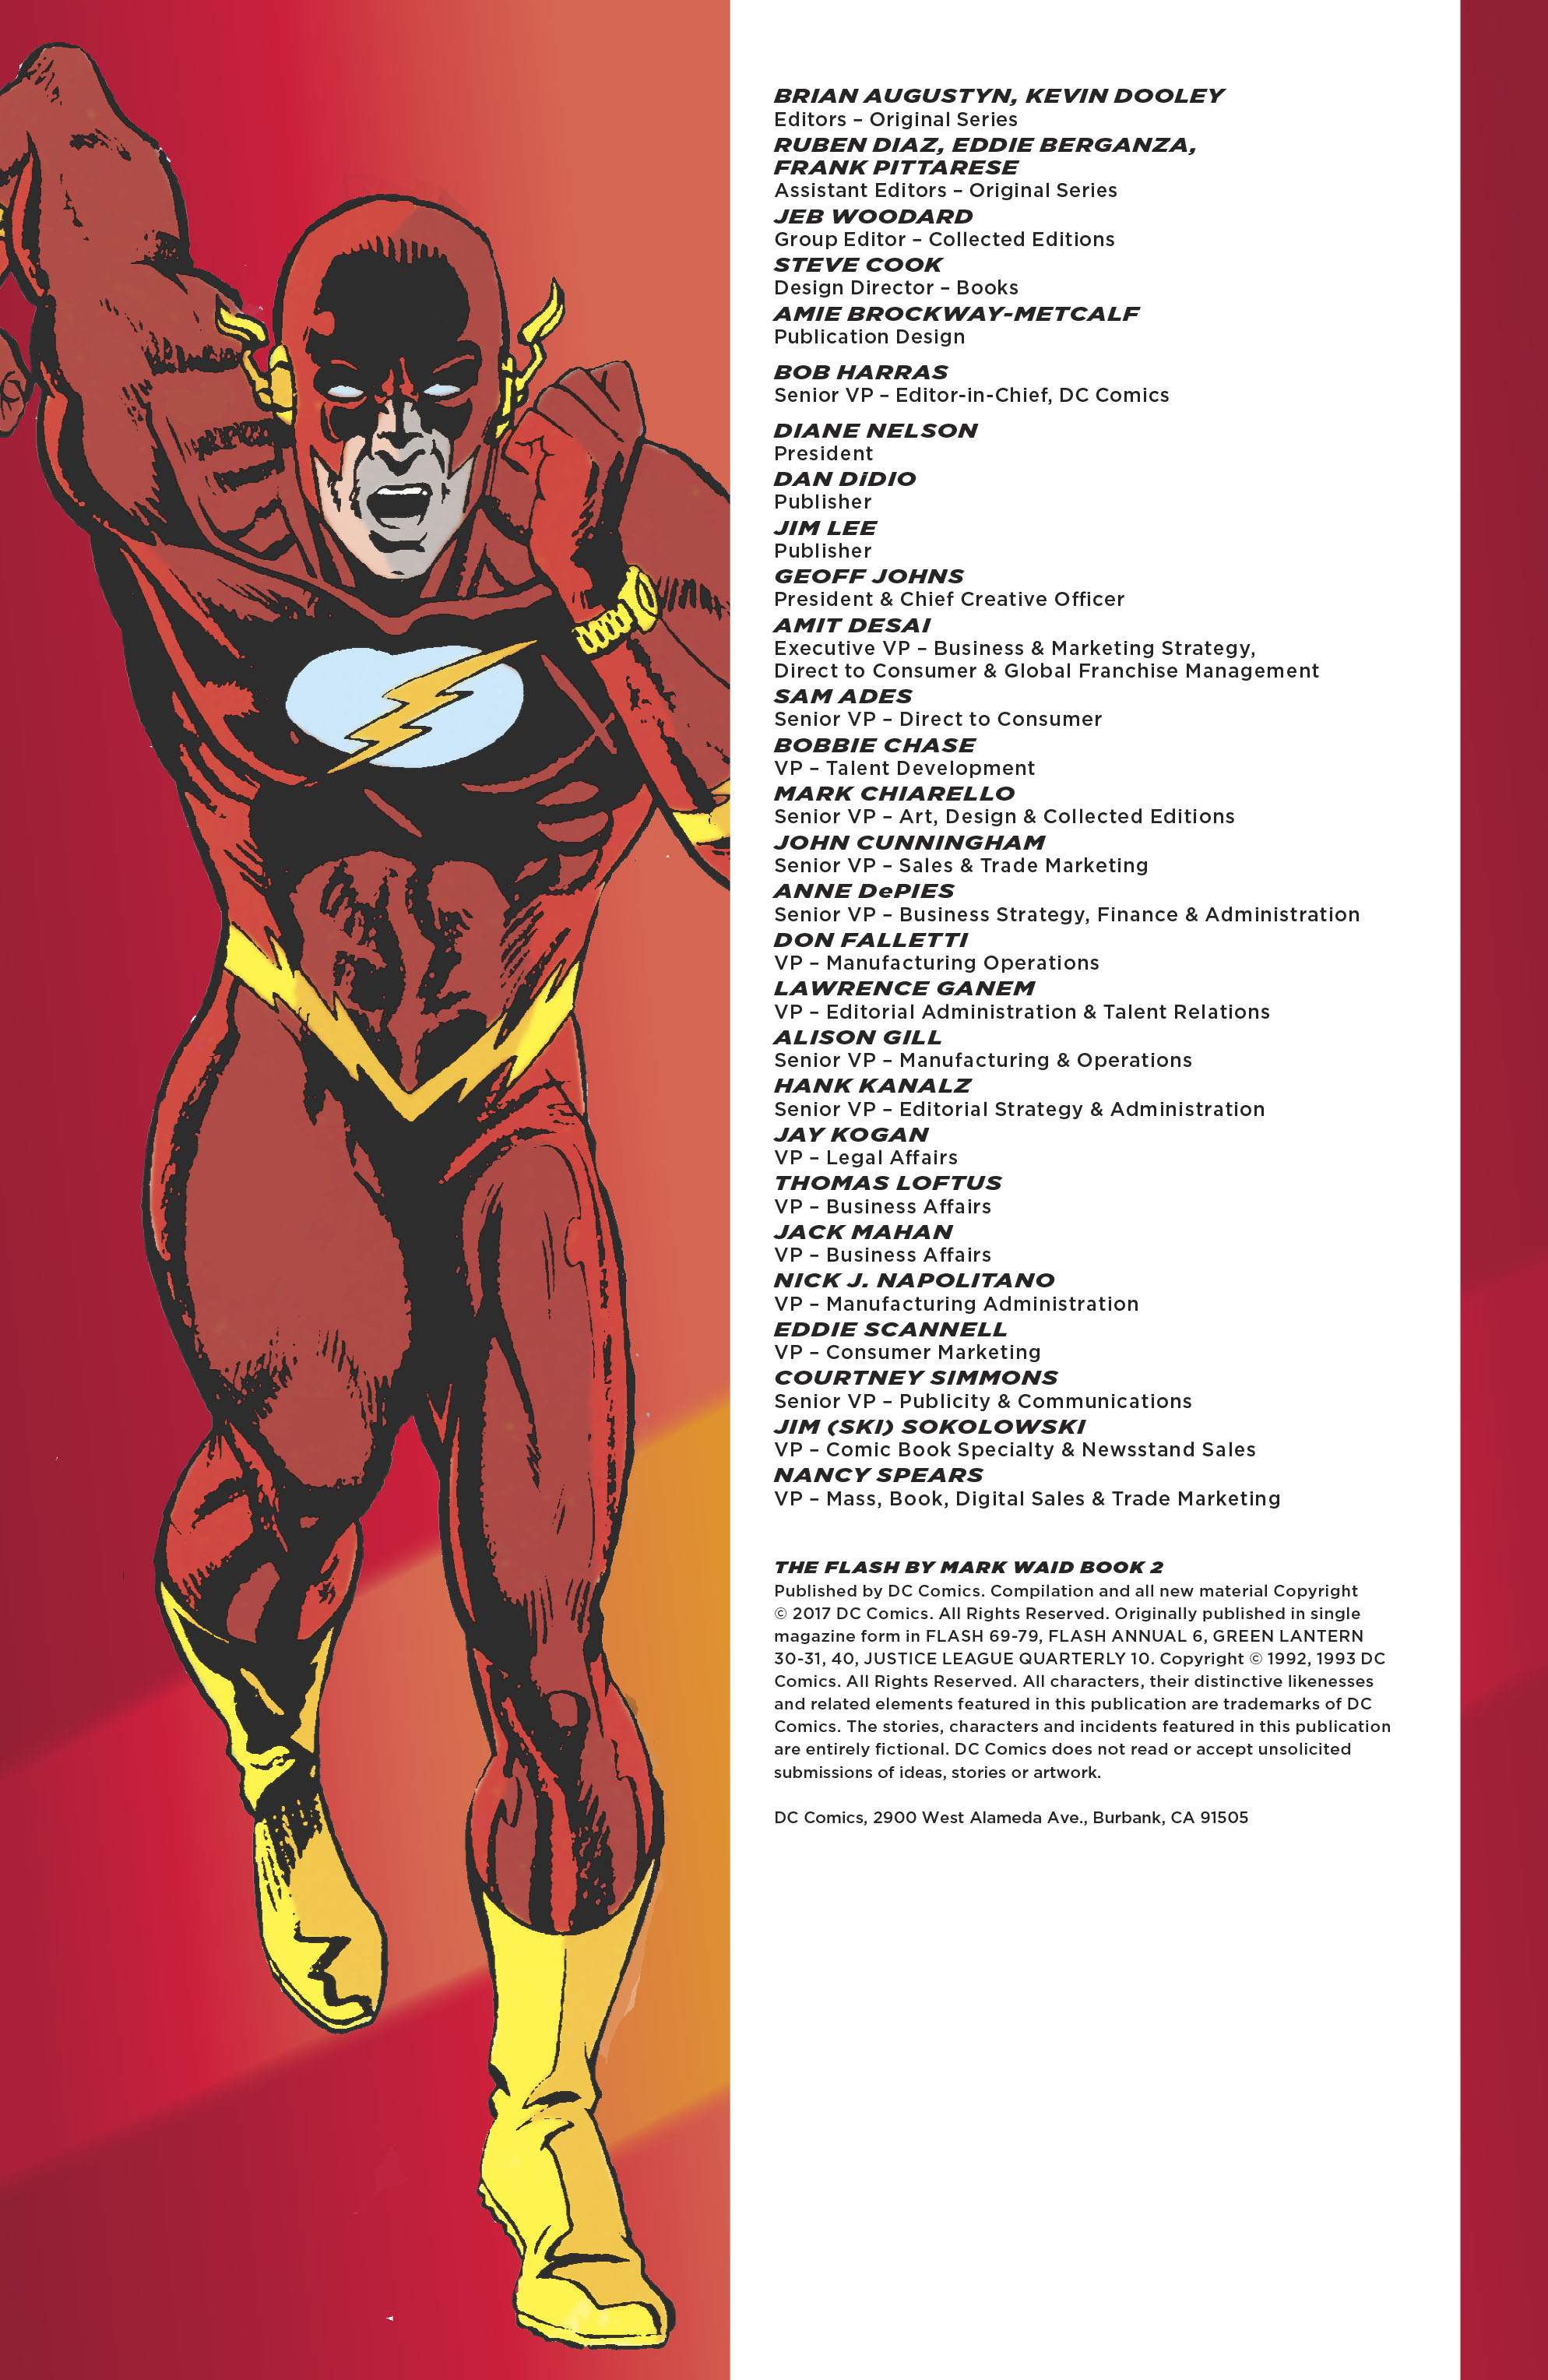 Read online The Flash (1987) comic -  Issue # _TPB The Flash by Mark Waid Book 2 (Part 1) - 4